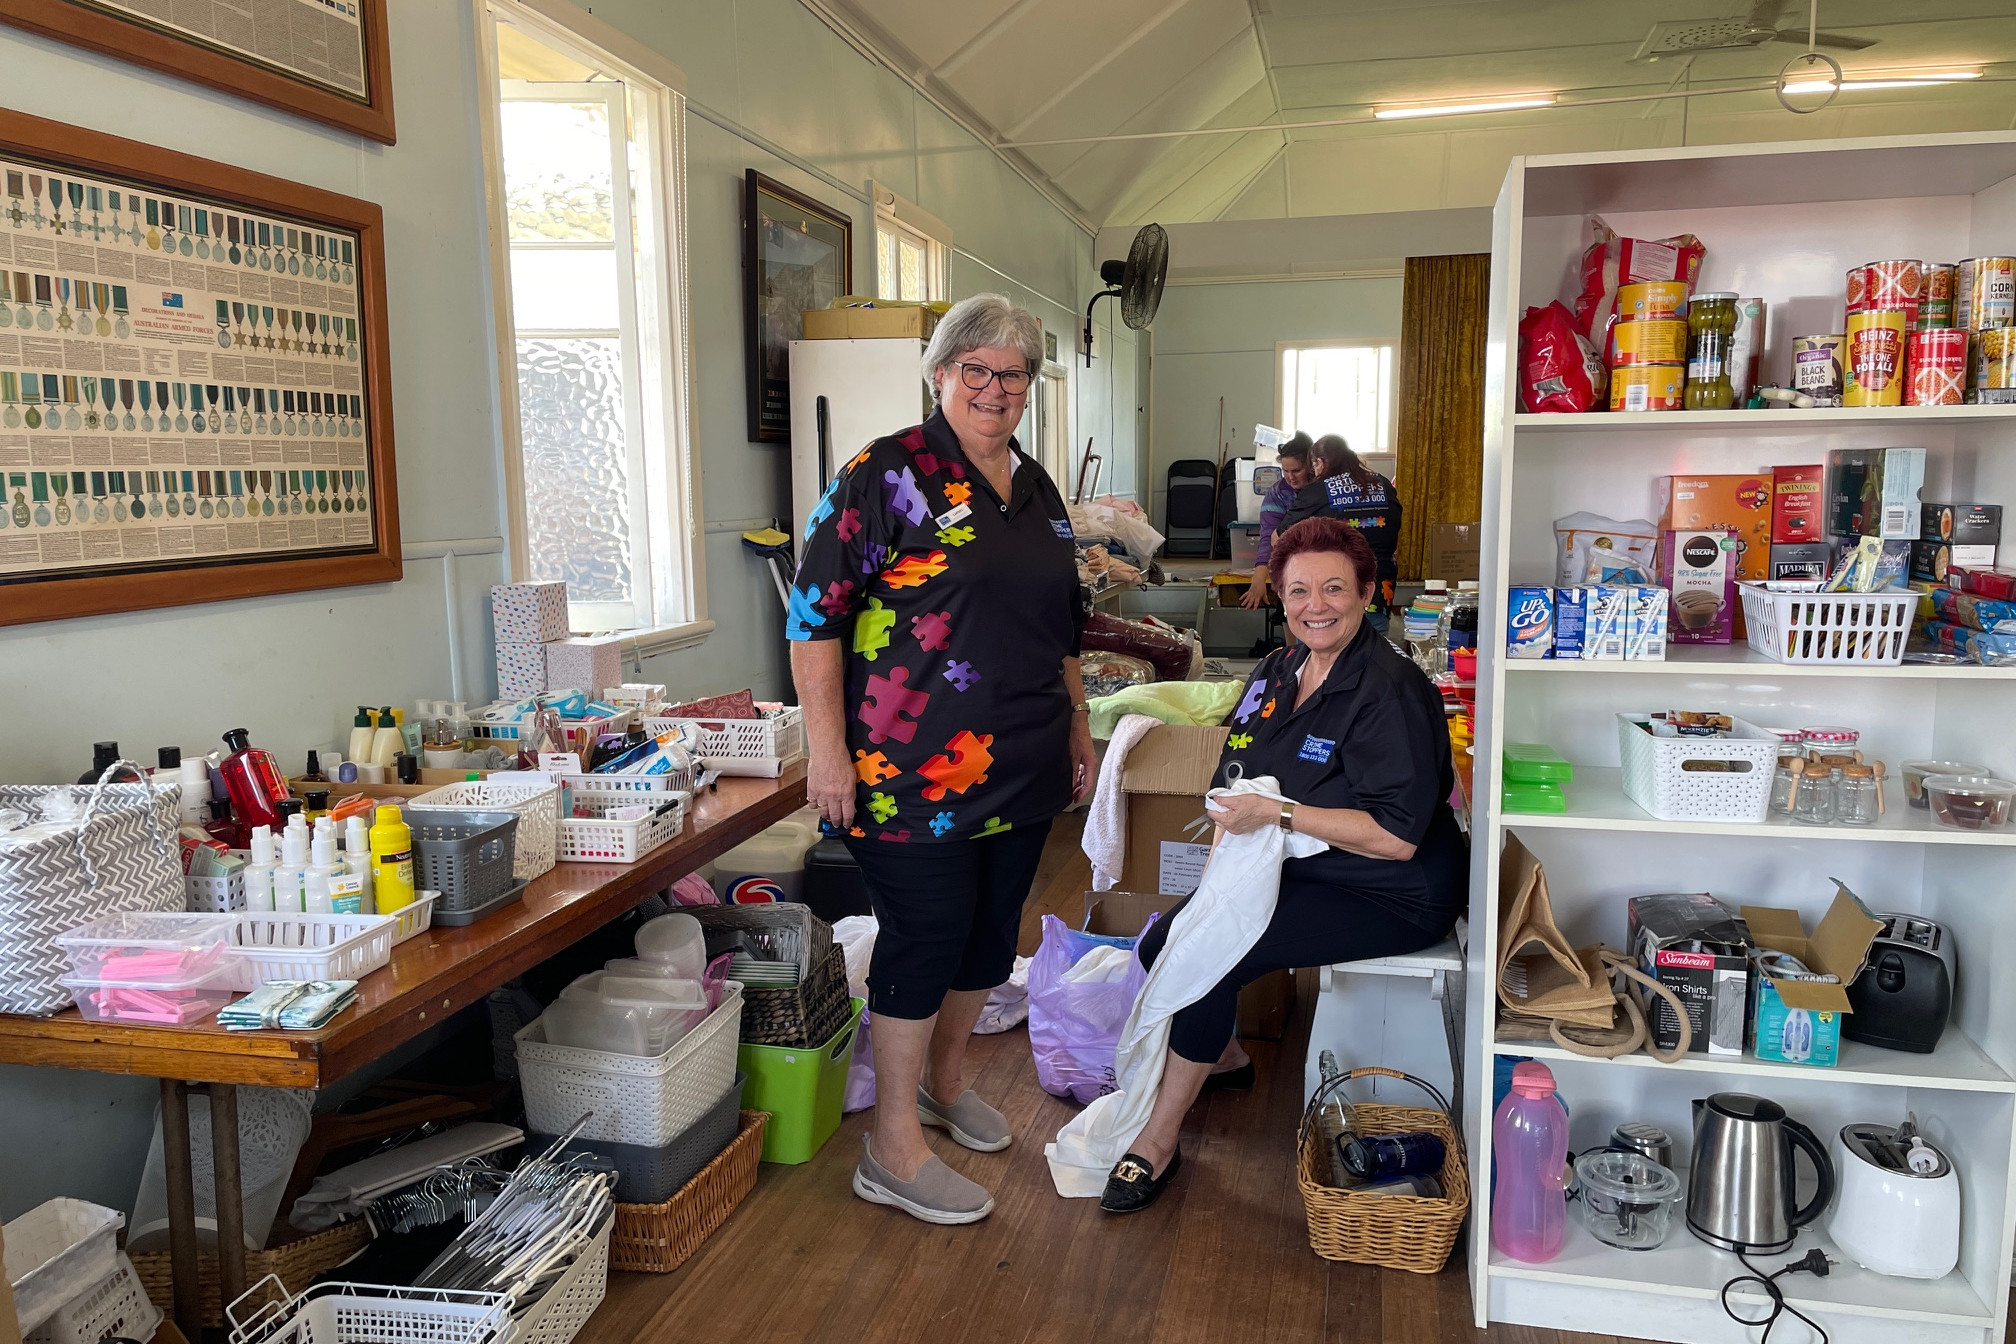 Mayor Angela Toppin and volunteer Carmel Pedron (left) help out at the hub which is assisting flood victims.